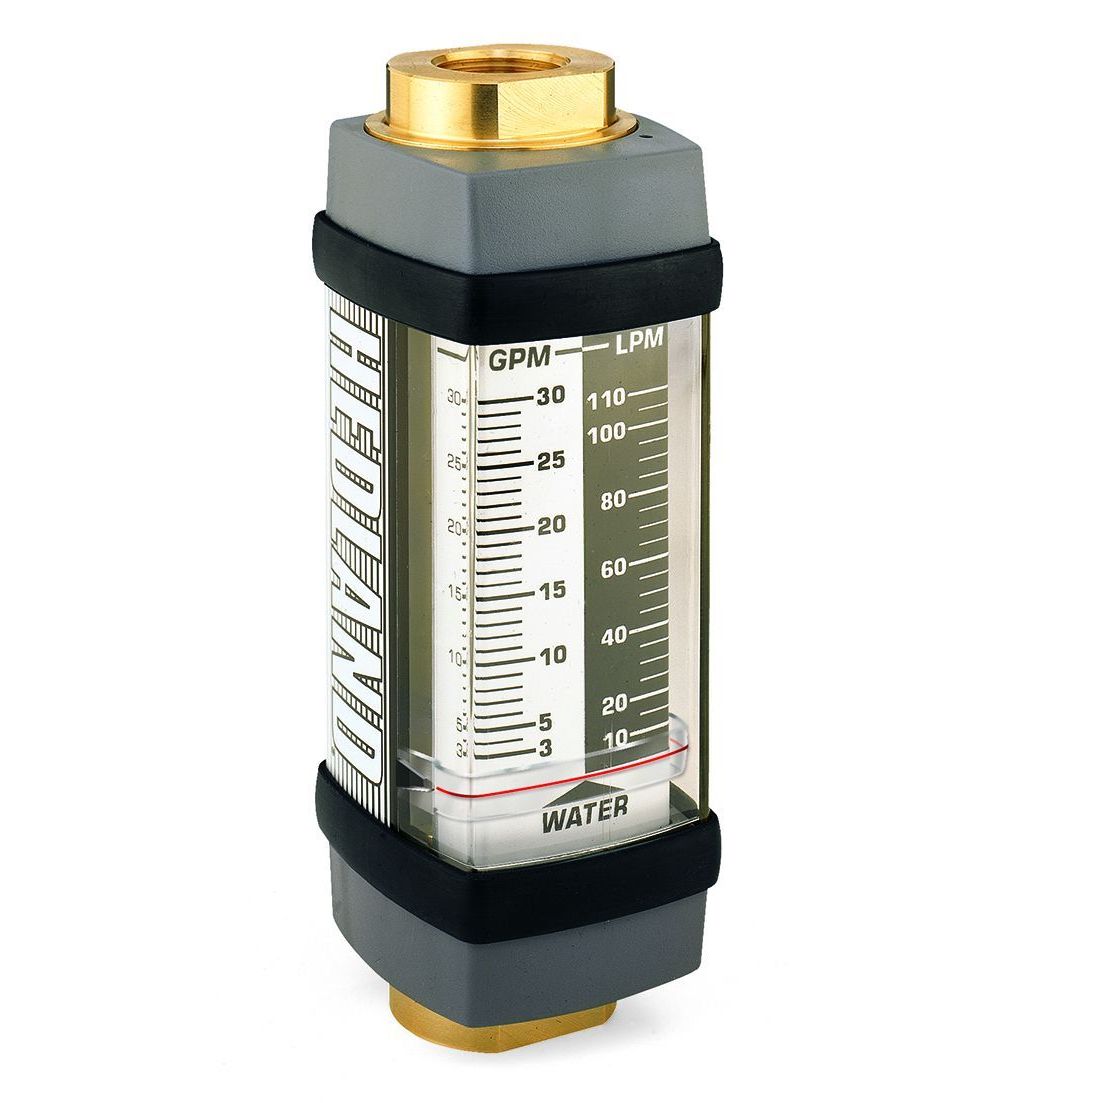 H854B-100 : Hedland 3500psi Brass Flow Meter for Water, #20 SAE (1.25), 10 to 100 GPM